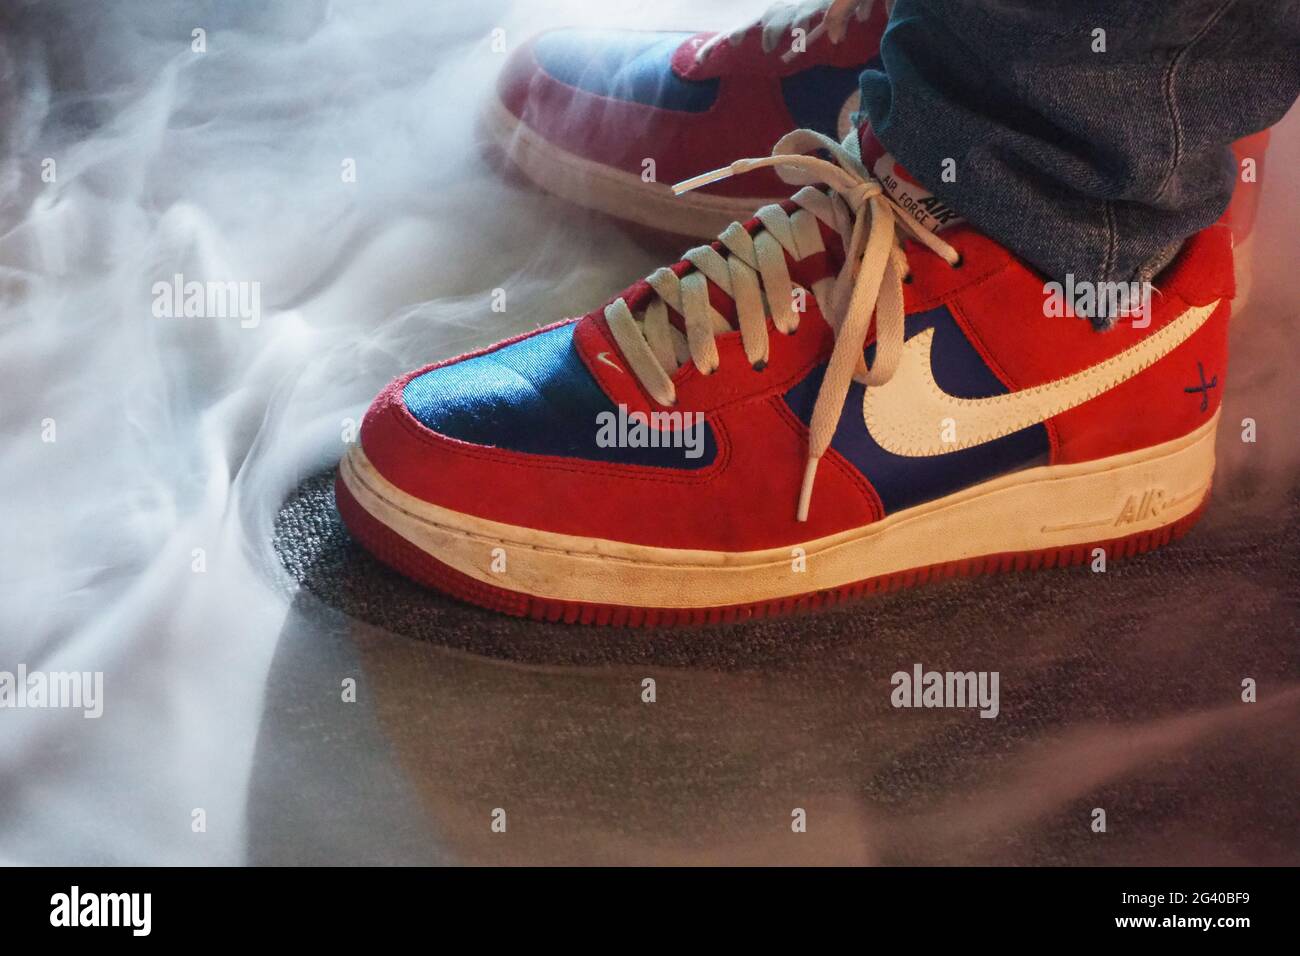 BPM 2019 - The Show For DJs, Nike Air Max Trainers surrounded by swirling  dry ice Stock Photo - Alamy